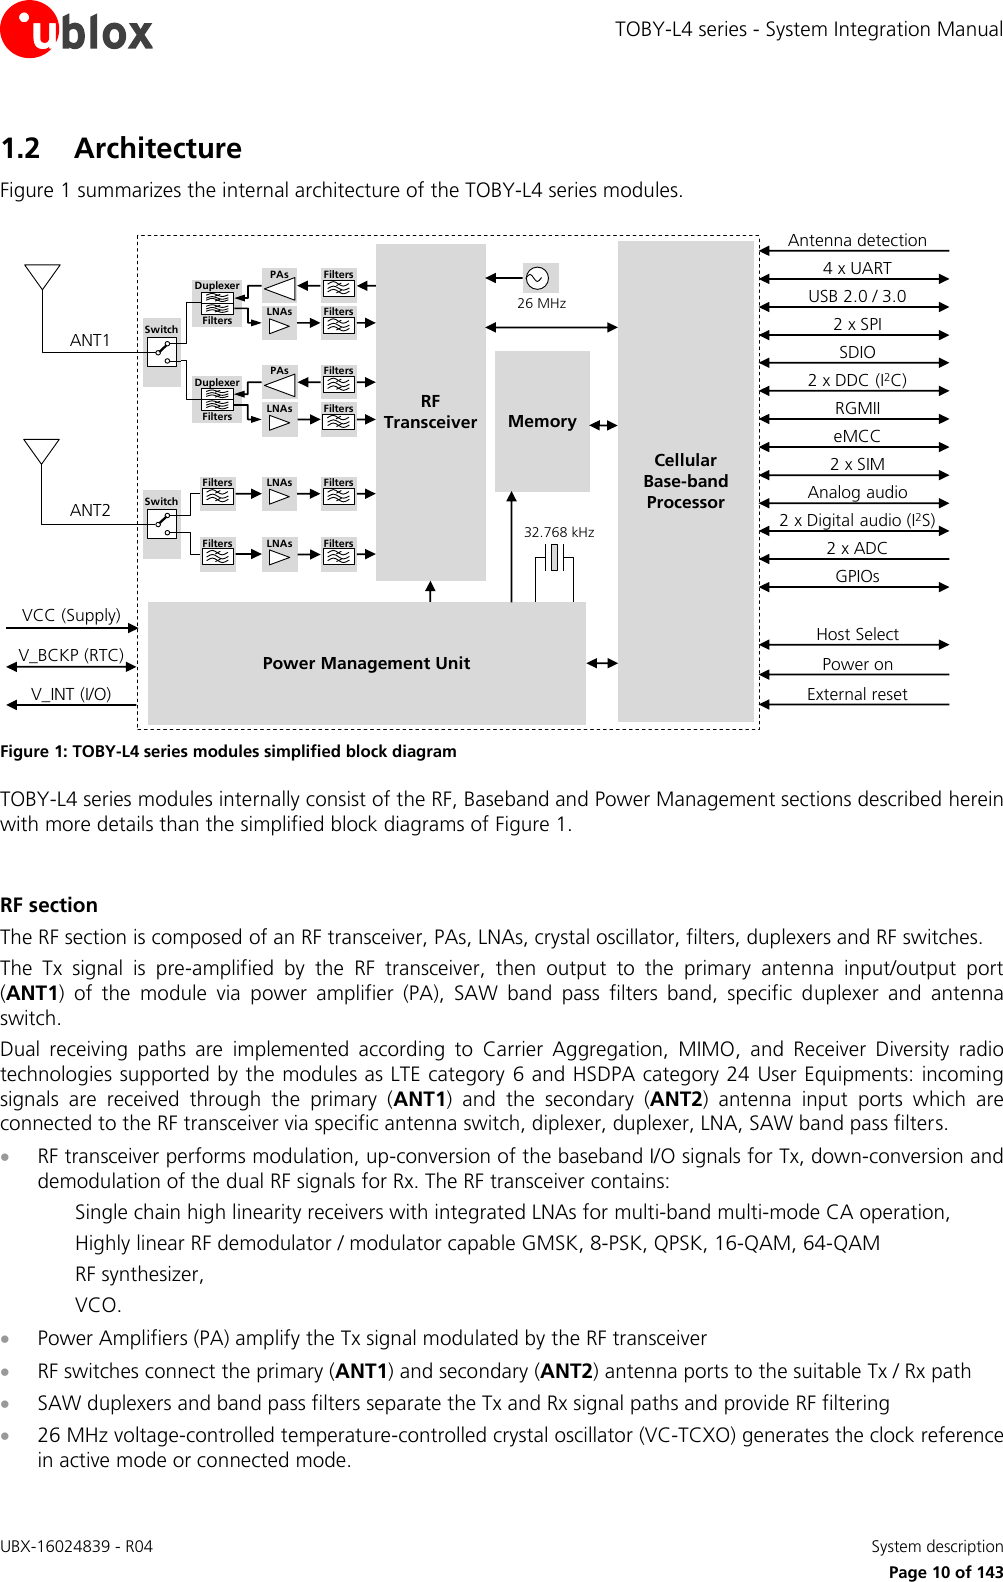 TOBY-L4 series - System Integration Manual UBX-16024839 - R04    System description     Page 10 of 143 1.2 Architecture Figure 1 summarizes the internal architecture of the TOBY-L4 series modules. CellularBase-bandProcessorMemoryPower Management Unit26 MHz32.768 kHzANT1RF TransceiverANT2V_INT (I/O)V_BCKP (RTC)VCC (Supply)2 x SIMUSB 2.0 / 3.02 x ADCPower onExternal resetPAsLNAs FiltersFiltersDuplexerFiltersPAsLNAs FiltersFiltersDuplexerFiltersLNAs FiltersFiltersLNAs FiltersFiltersSwitchSwitch2 x DDC (I2C)SDIO4 x UARTAnalog audioAntenna detectionHost Select2 x SPIRGMIIeMCC2 x Digital audio (I2S)GPIOs Figure 1: TOBY-L4 series modules simplified block diagram TOBY-L4 series modules internally consist of the RF, Baseband and Power Management sections described herein with more details than the simplified block diagrams of Figure 1.  RF section The RF section is composed of an RF transceiver, PAs, LNAs, crystal oscillator, filters, duplexers and RF switches. The  Tx  signal  is  pre-amplified  by  the  RF  transceiver,  then  output  to  the  primary  antenna  input/output  port (ANT1)  of  the  module  via  power  amplifier  (PA),  SAW  band  pass  filters  band,  specific  duplexer  and  antenna switch. Dual  receiving  paths  are  implemented  according  to  Carrier  Aggregation,  MIMO,  and  Receiver  Diversity  radio technologies supported by the modules as LTE category 6 and HSDPA category 24 User Equipments: incoming signals  are  received  through  the  primary  (ANT1)  and  the  secondary  (ANT2)  antenna  input  ports  which  are connected to the RF transceiver via specific antenna switch, diplexer, duplexer, LNA, SAW band pass filters.  RF transceiver performs modulation, up-conversion of the baseband I/O signals for Tx, down-conversion and demodulation of the dual RF signals for Rx. The RF transceiver contains: Single chain high linearity receivers with integrated LNAs for multi-band multi-mode CA operation, Highly linear RF demodulator / modulator capable GMSK, 8-PSK, QPSK, 16-QAM, 64-QAM RF synthesizer, VCO.  Power Amplifiers (PA) amplify the Tx signal modulated by the RF transceiver   RF switches connect the primary (ANT1) and secondary (ANT2) antenna ports to the suitable Tx / Rx path  SAW duplexers and band pass filters separate the Tx and Rx signal paths and provide RF filtering  26 MHz voltage-controlled temperature-controlled crystal oscillator (VC-TCXO) generates the clock reference in active mode or connected mode. 